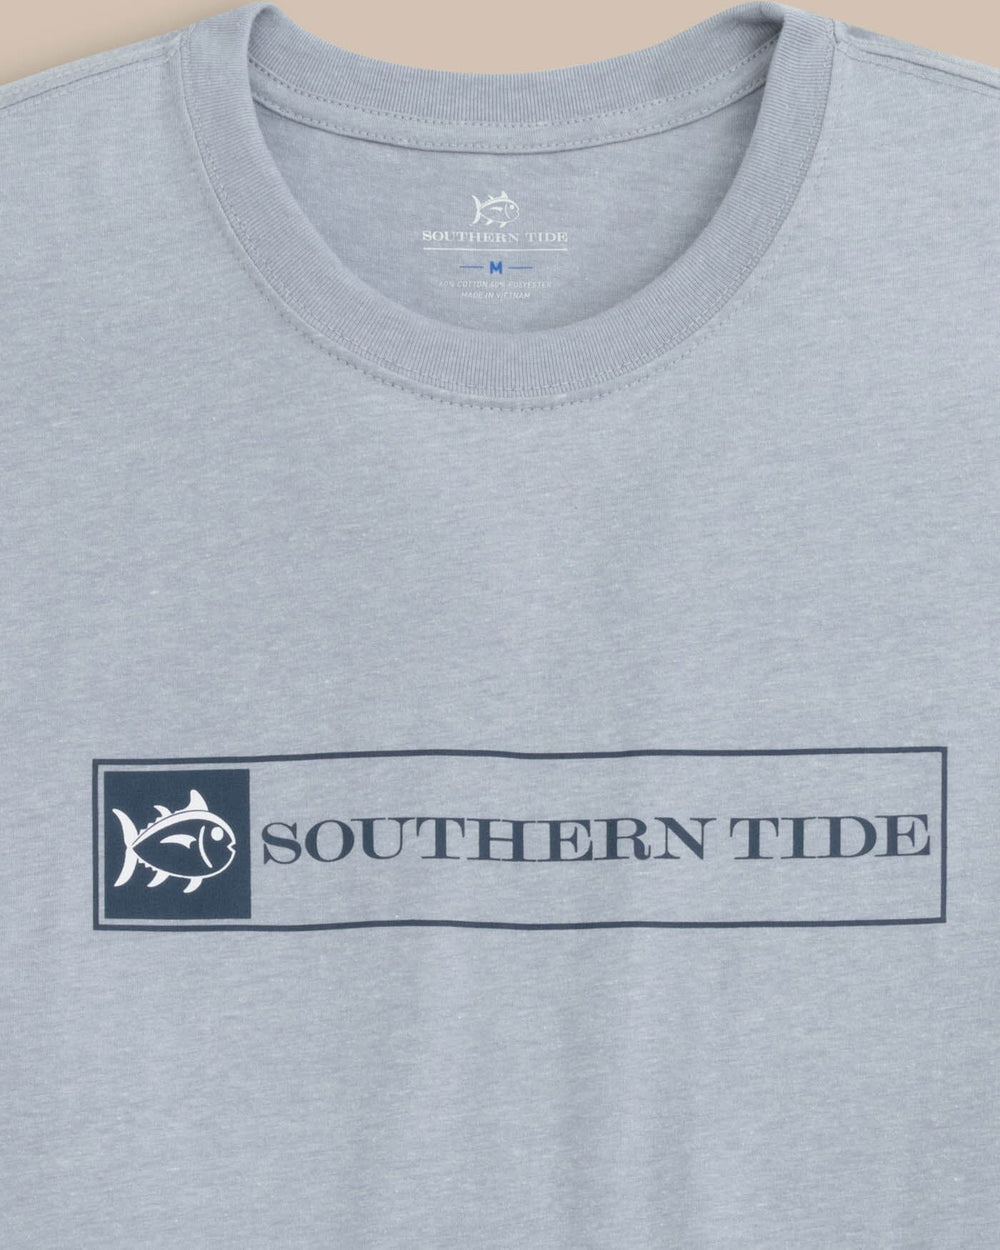 The front view of the Southern Tide Heather ST Banner Year Front Graphic Short Sleeve T-shirt by Southern Tide - Heather Platinum Grey